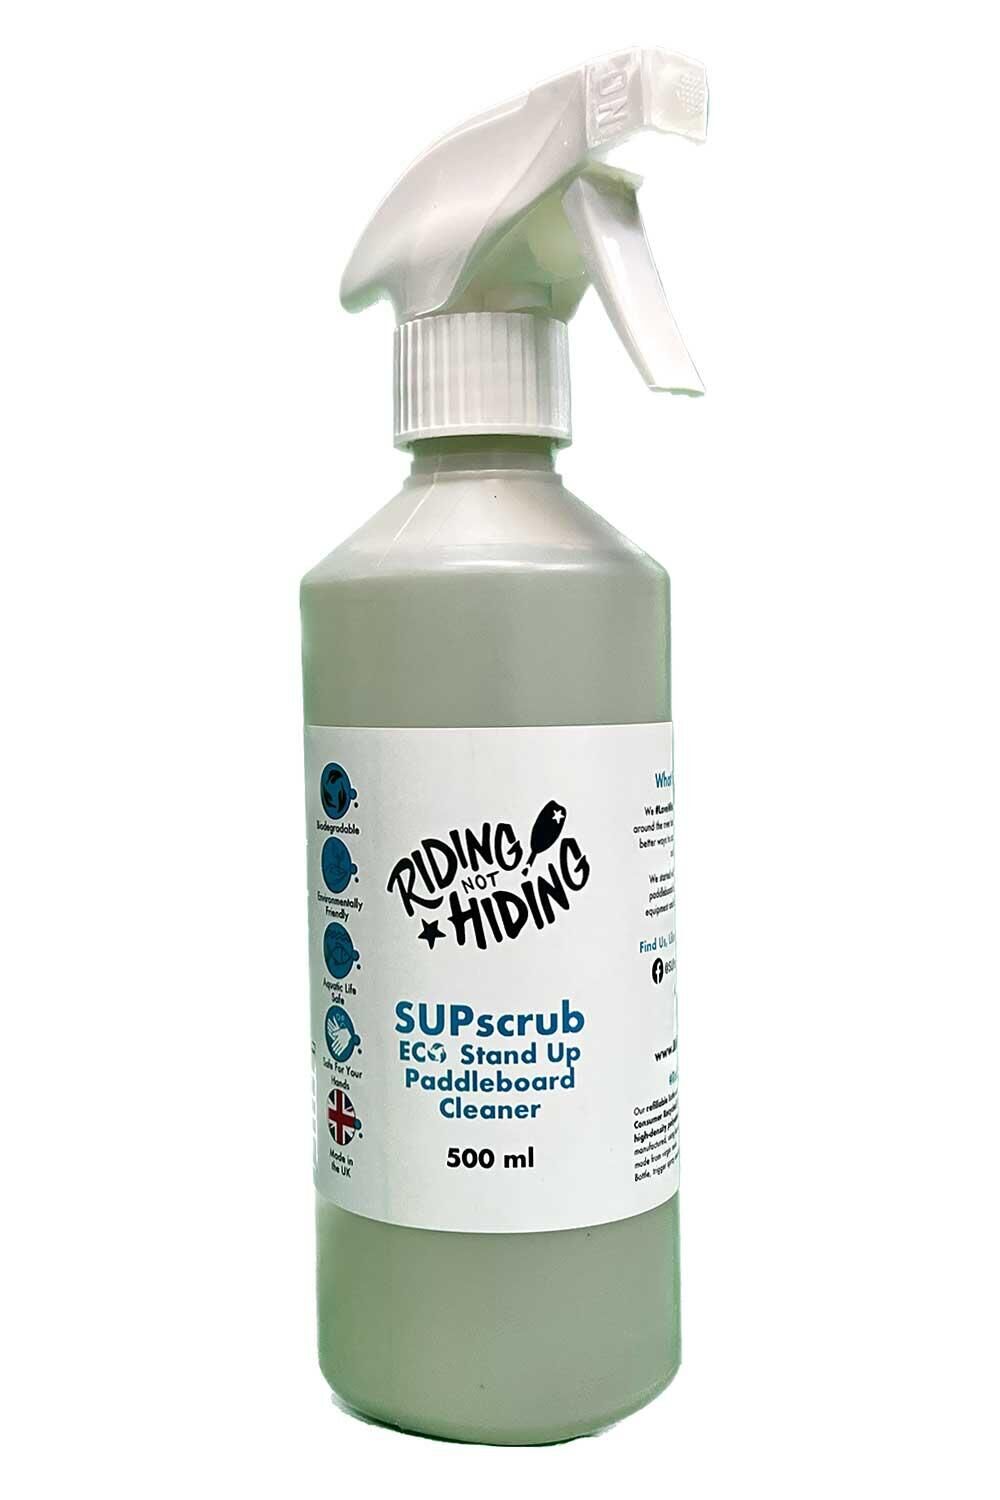 RIDING NOT HIDING SUP SCRUB - THE ECO PADDLEBOARD CLEANER